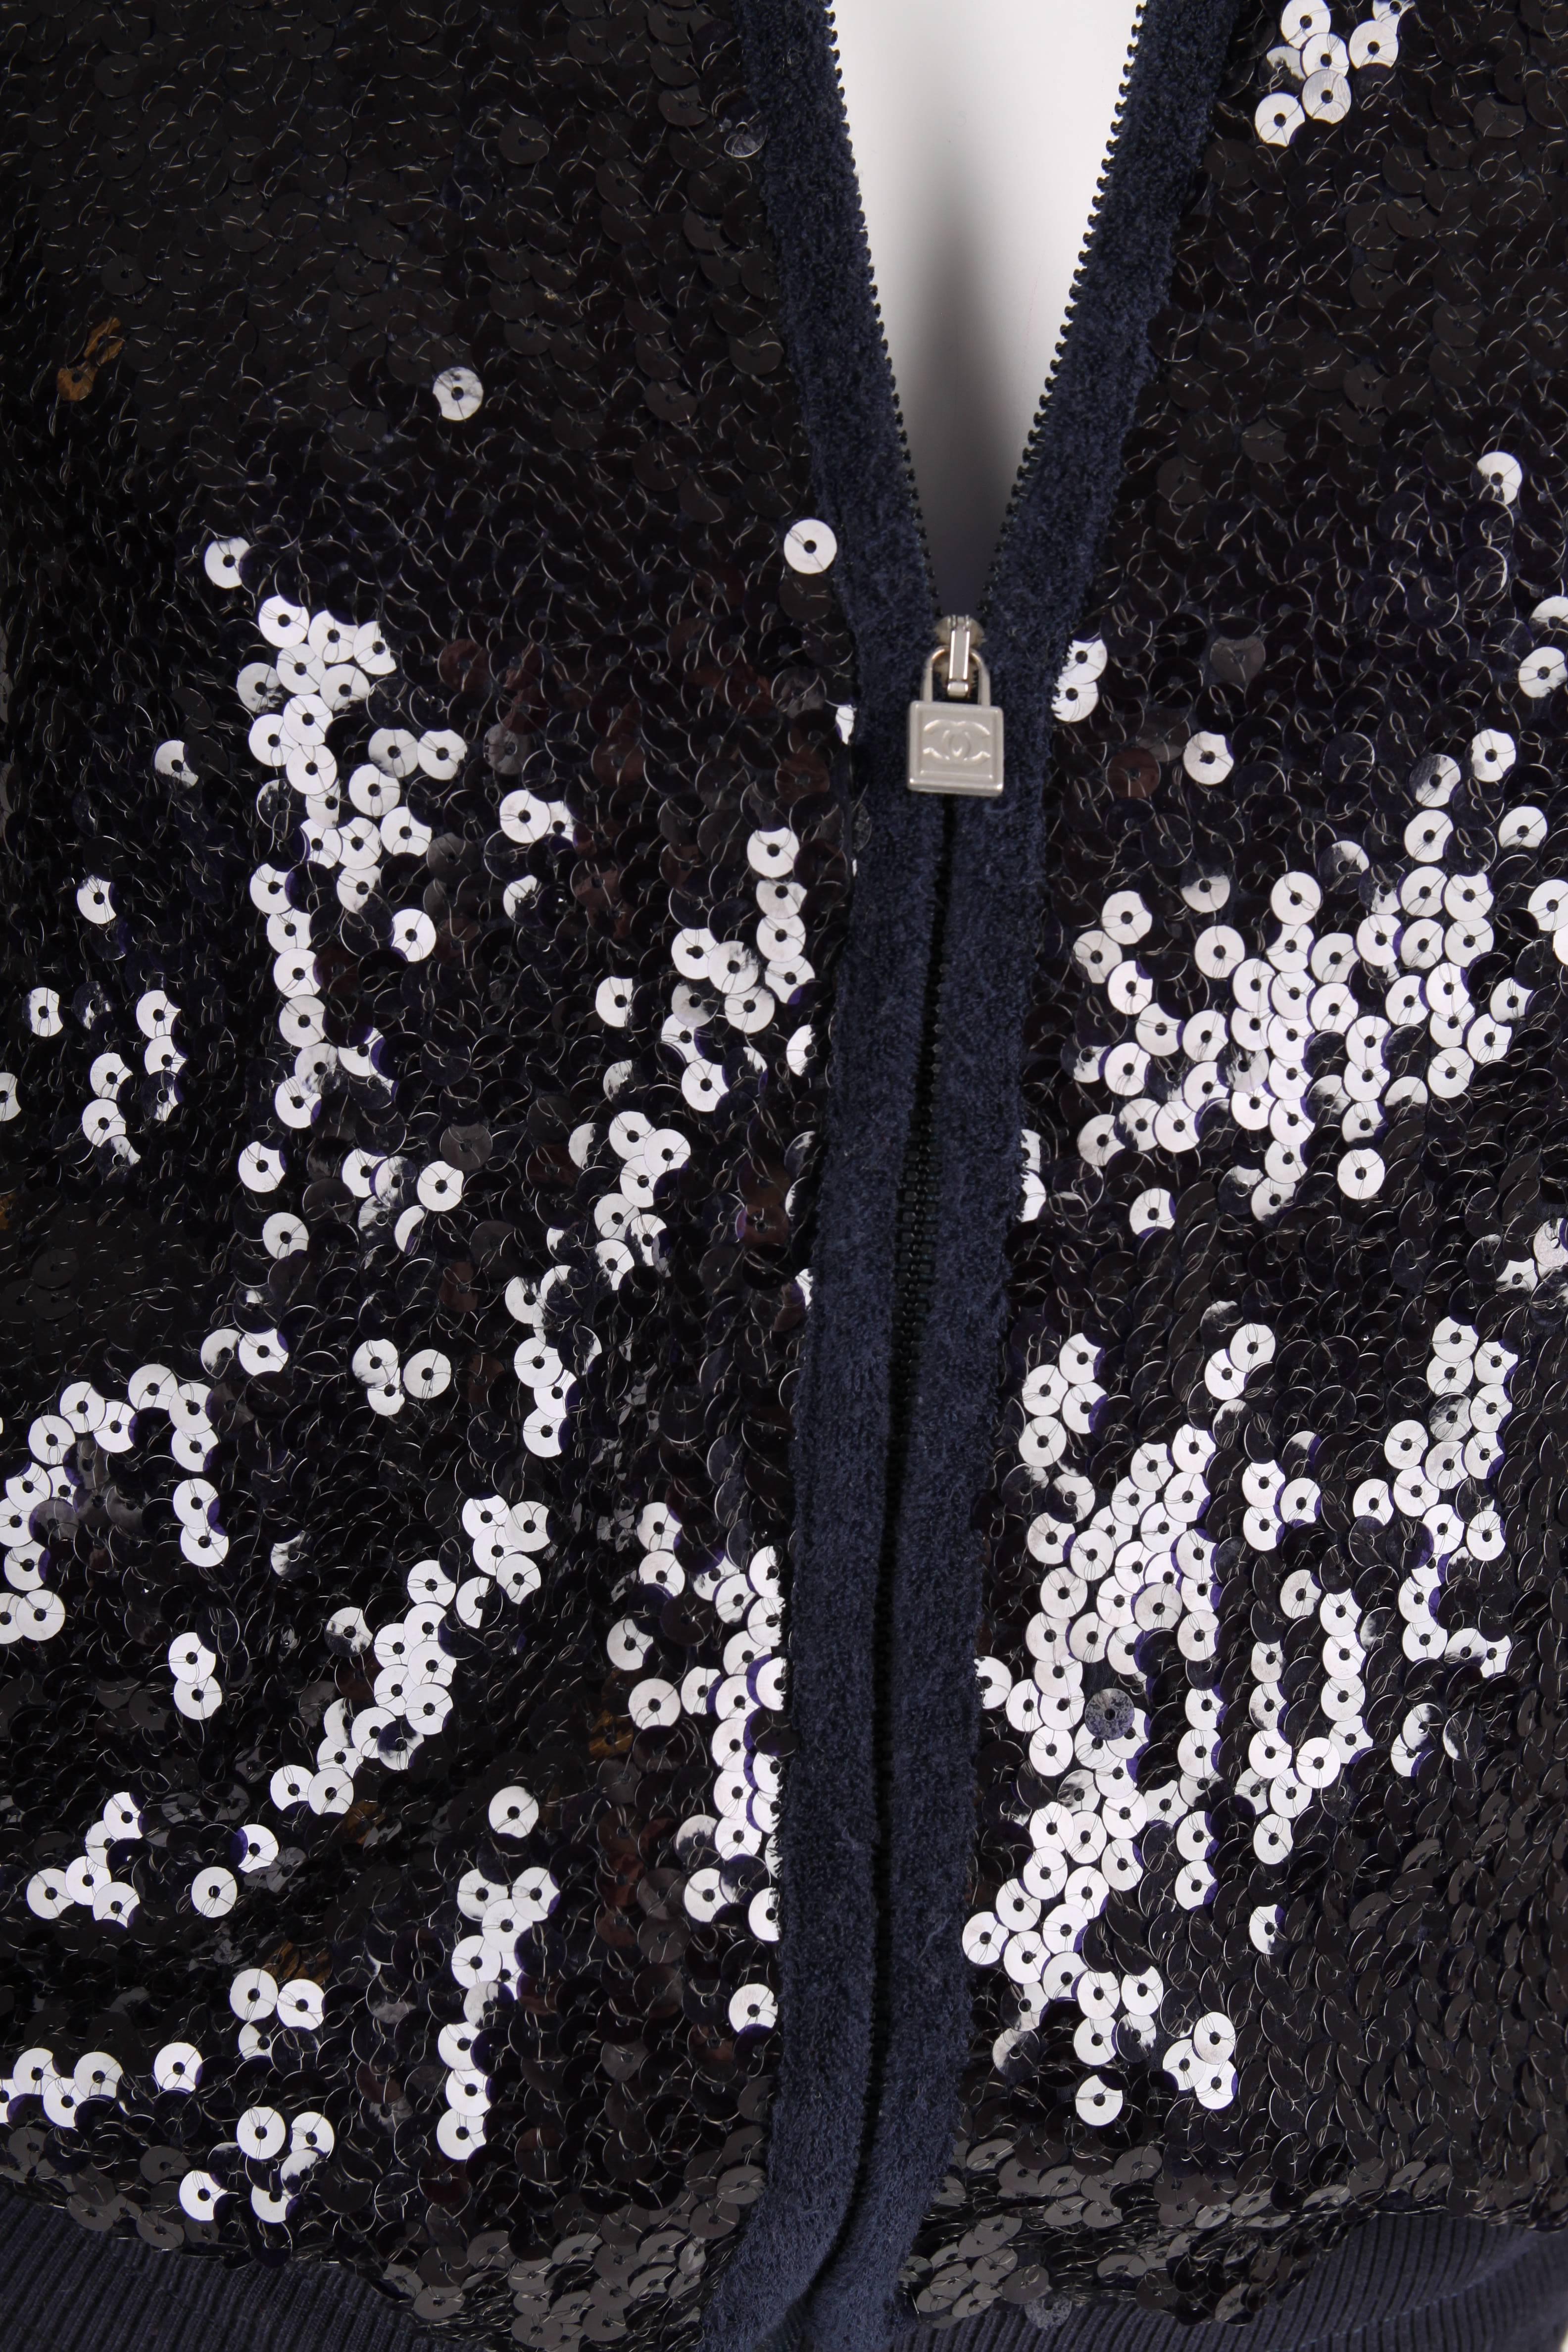 A dark blue sequin jacket from the Sports Line of Chanel, 2008 Cruise Collection. Fancy!!

Front and back are covered with sequins, terry cloth detailing on the sleeves and the area around the zipped pockets. A drawstring at the collar, in the waist